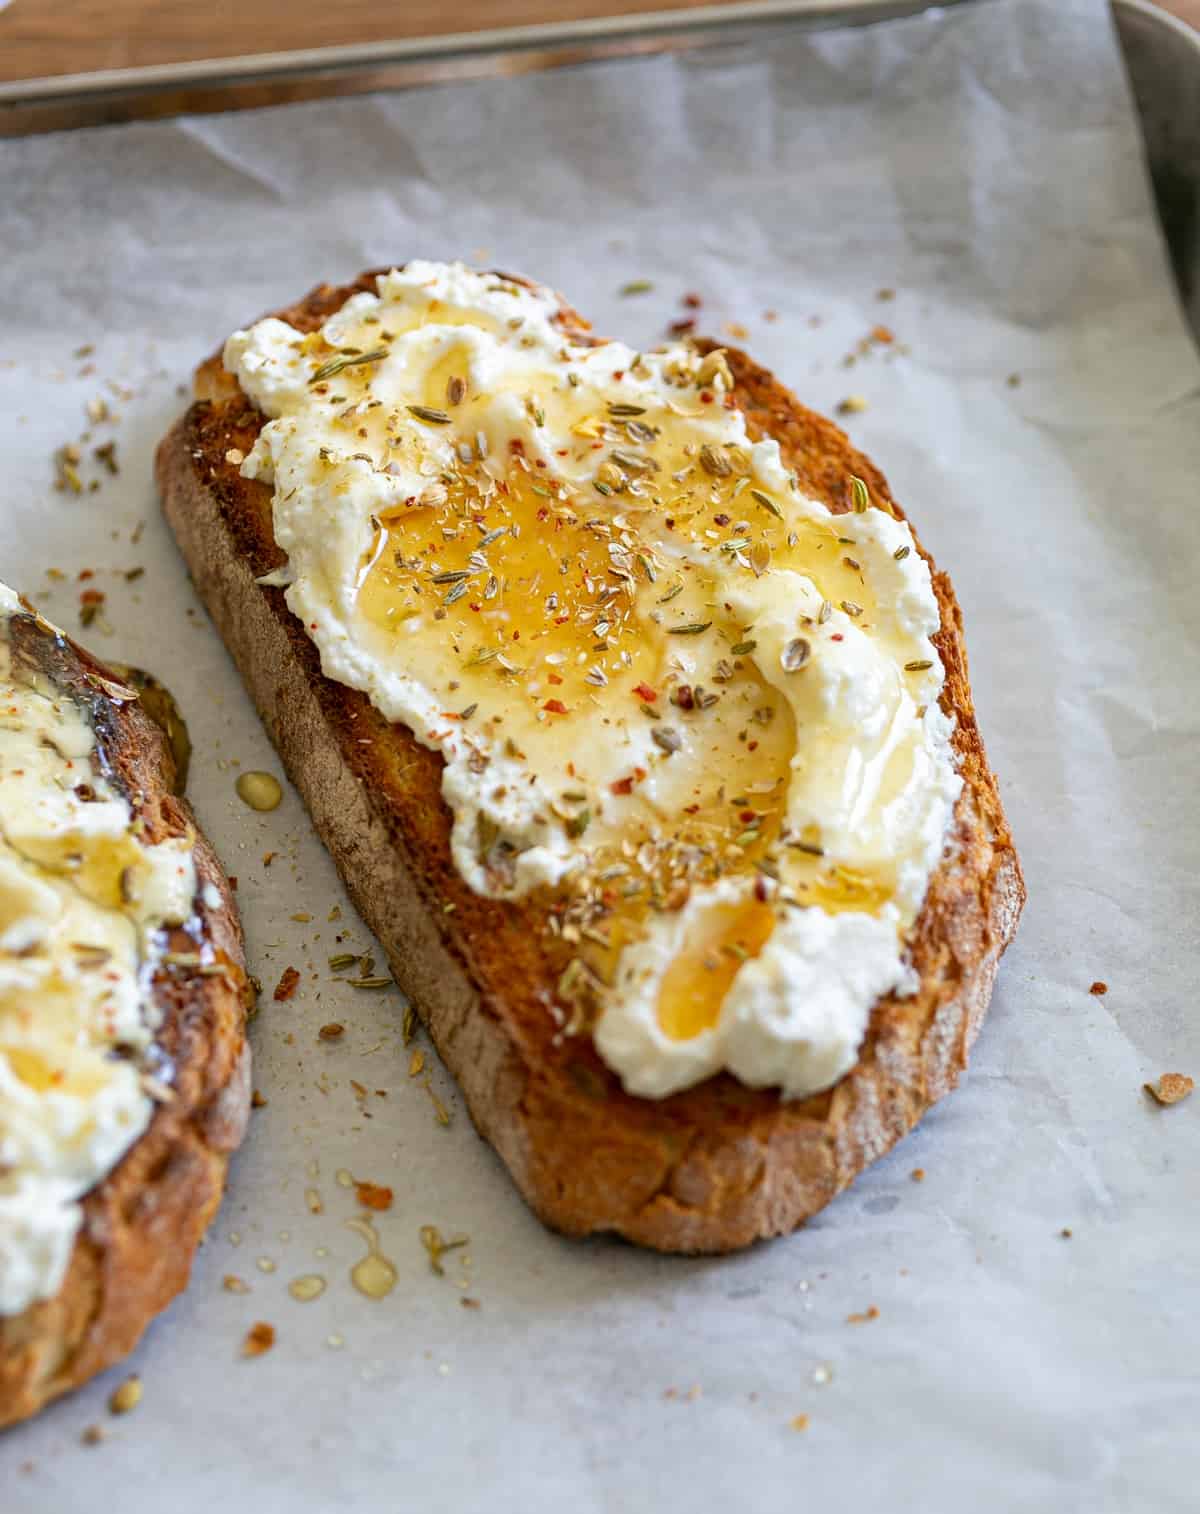 ricotta, honey and spices spread over crusty toasted bread, sitting on white parchment paper and a silver serving tray on top of a brown wooden kitchen top 